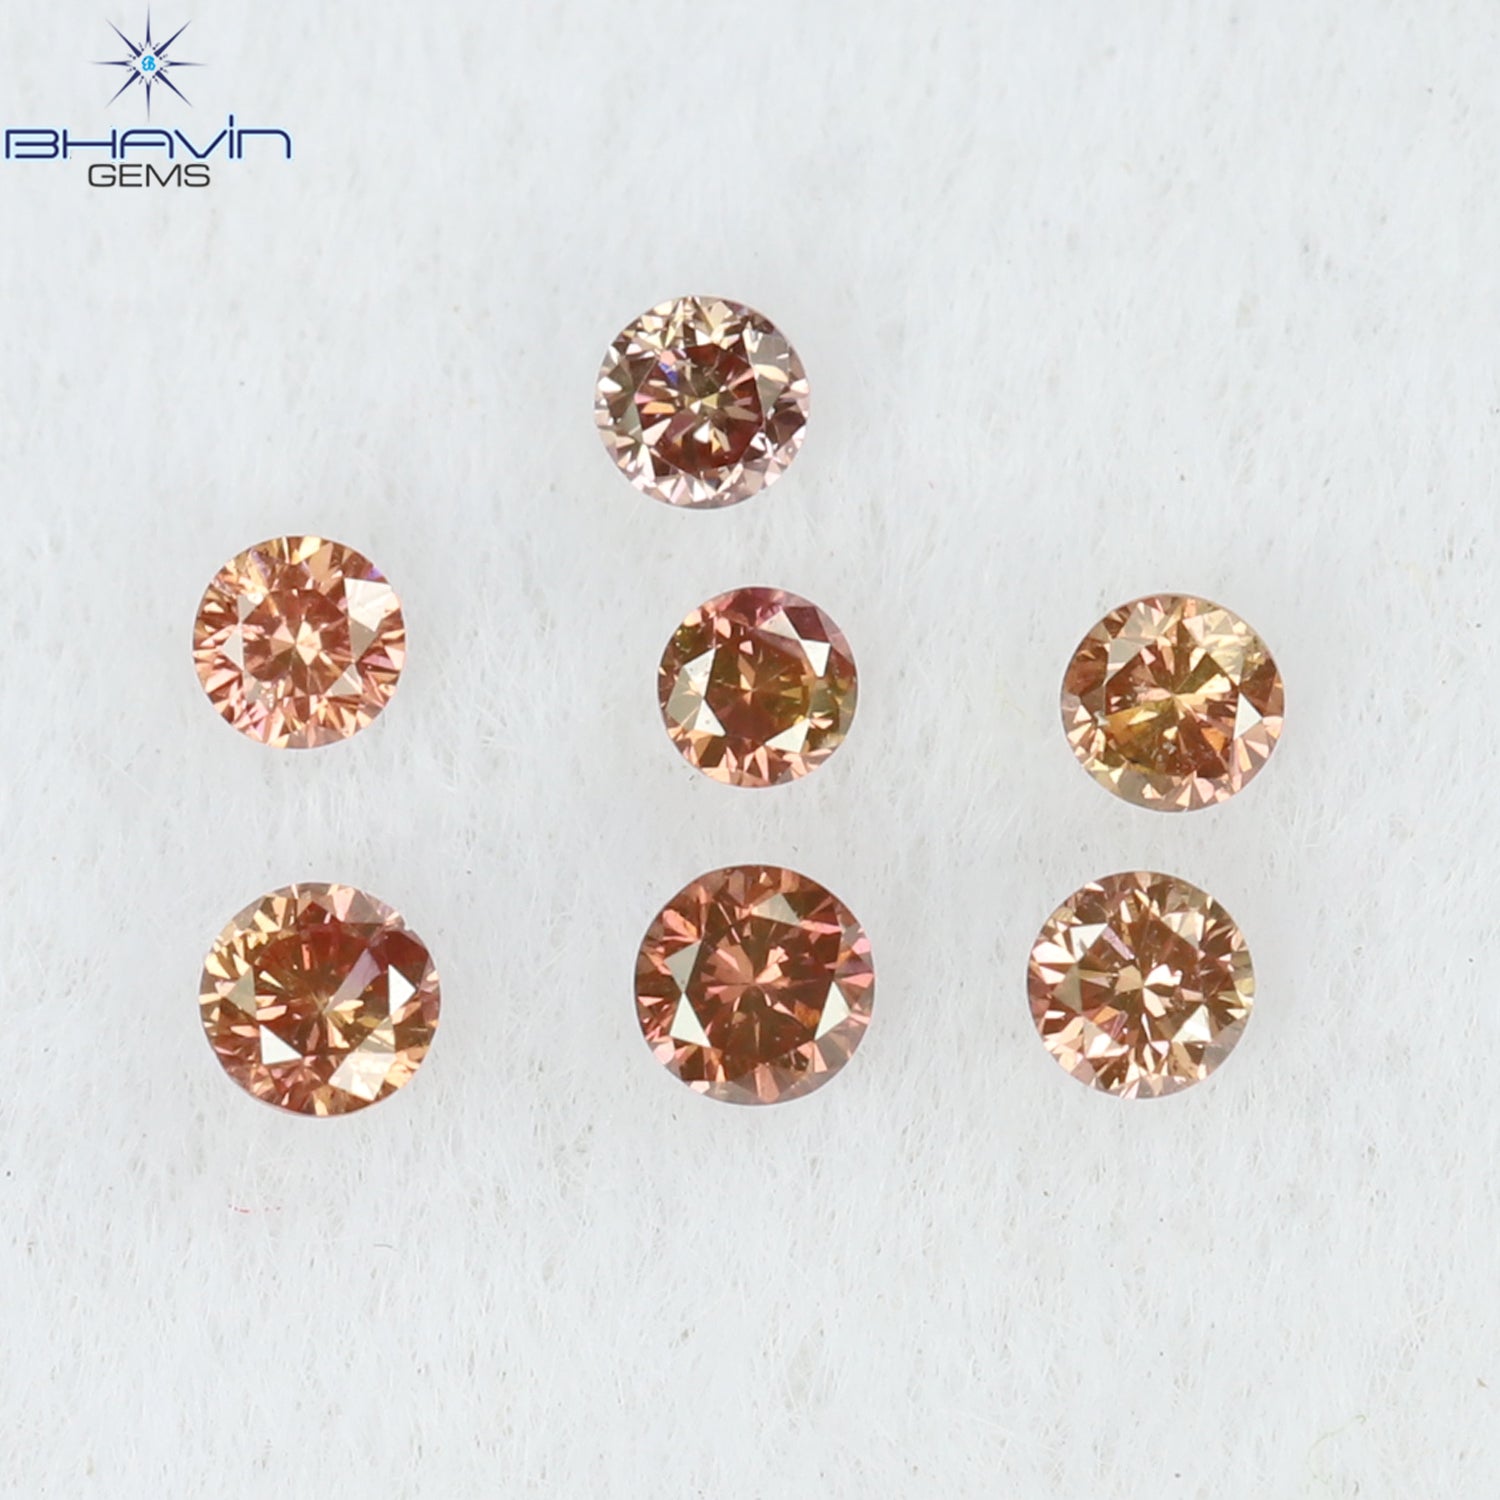 0.08 CT/7 Pcs Round Shape Natural Loose Diamond Pink Color SI Clarity (1.50 MM)